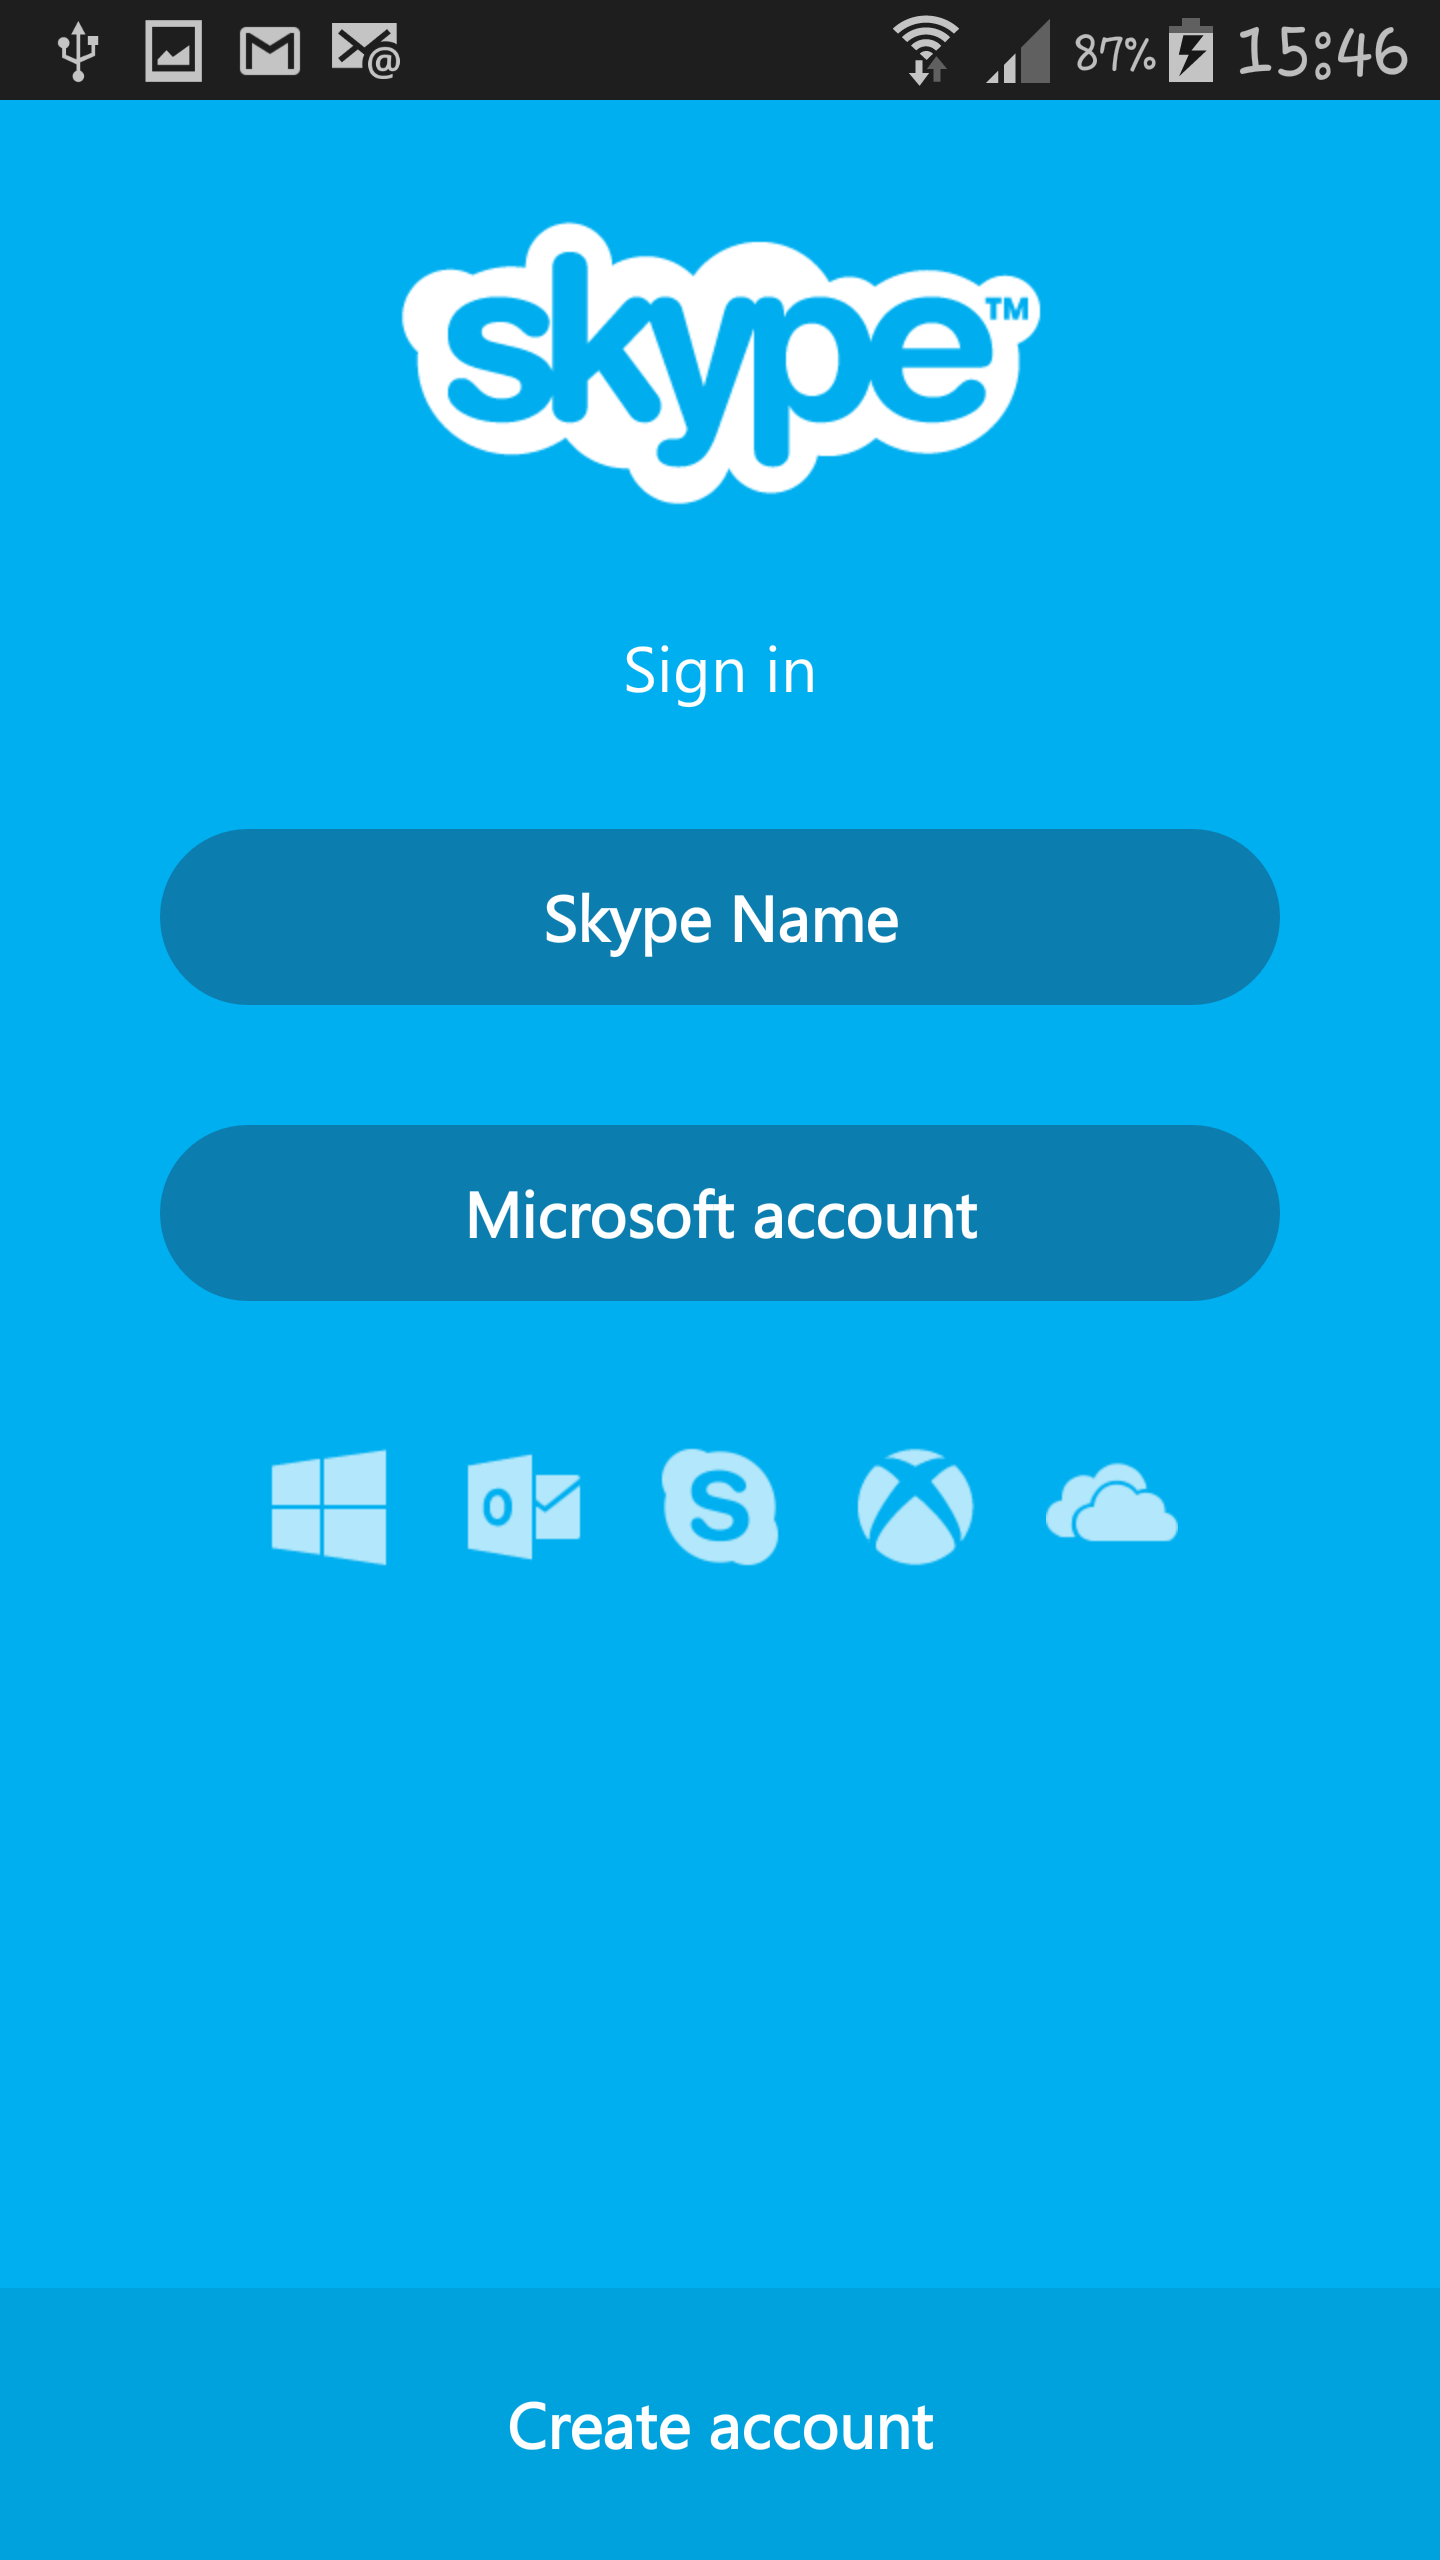 How To Fix Skype Logout Problem on Android To Completely Sign Out